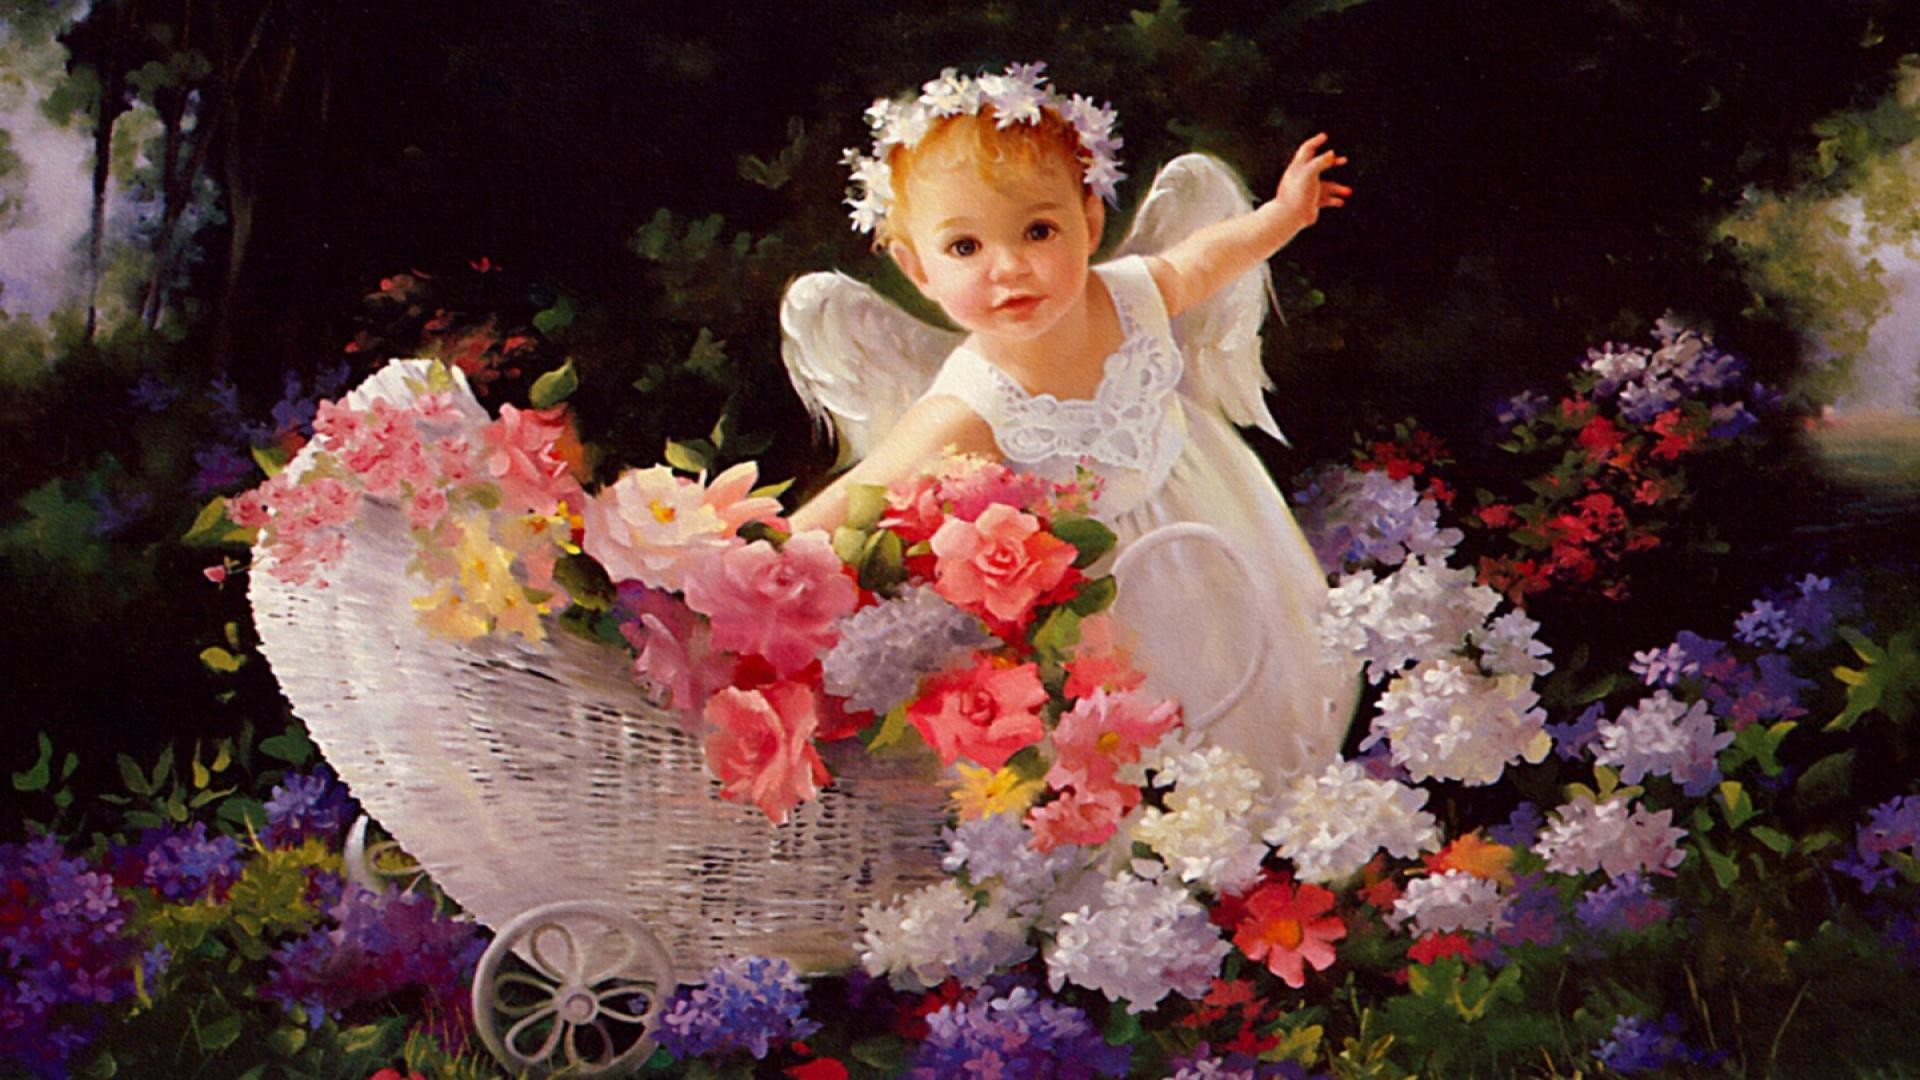 Res - 2560x1600, - Cute Baby Angels Hd , HD Wallpaper & Backgrounds